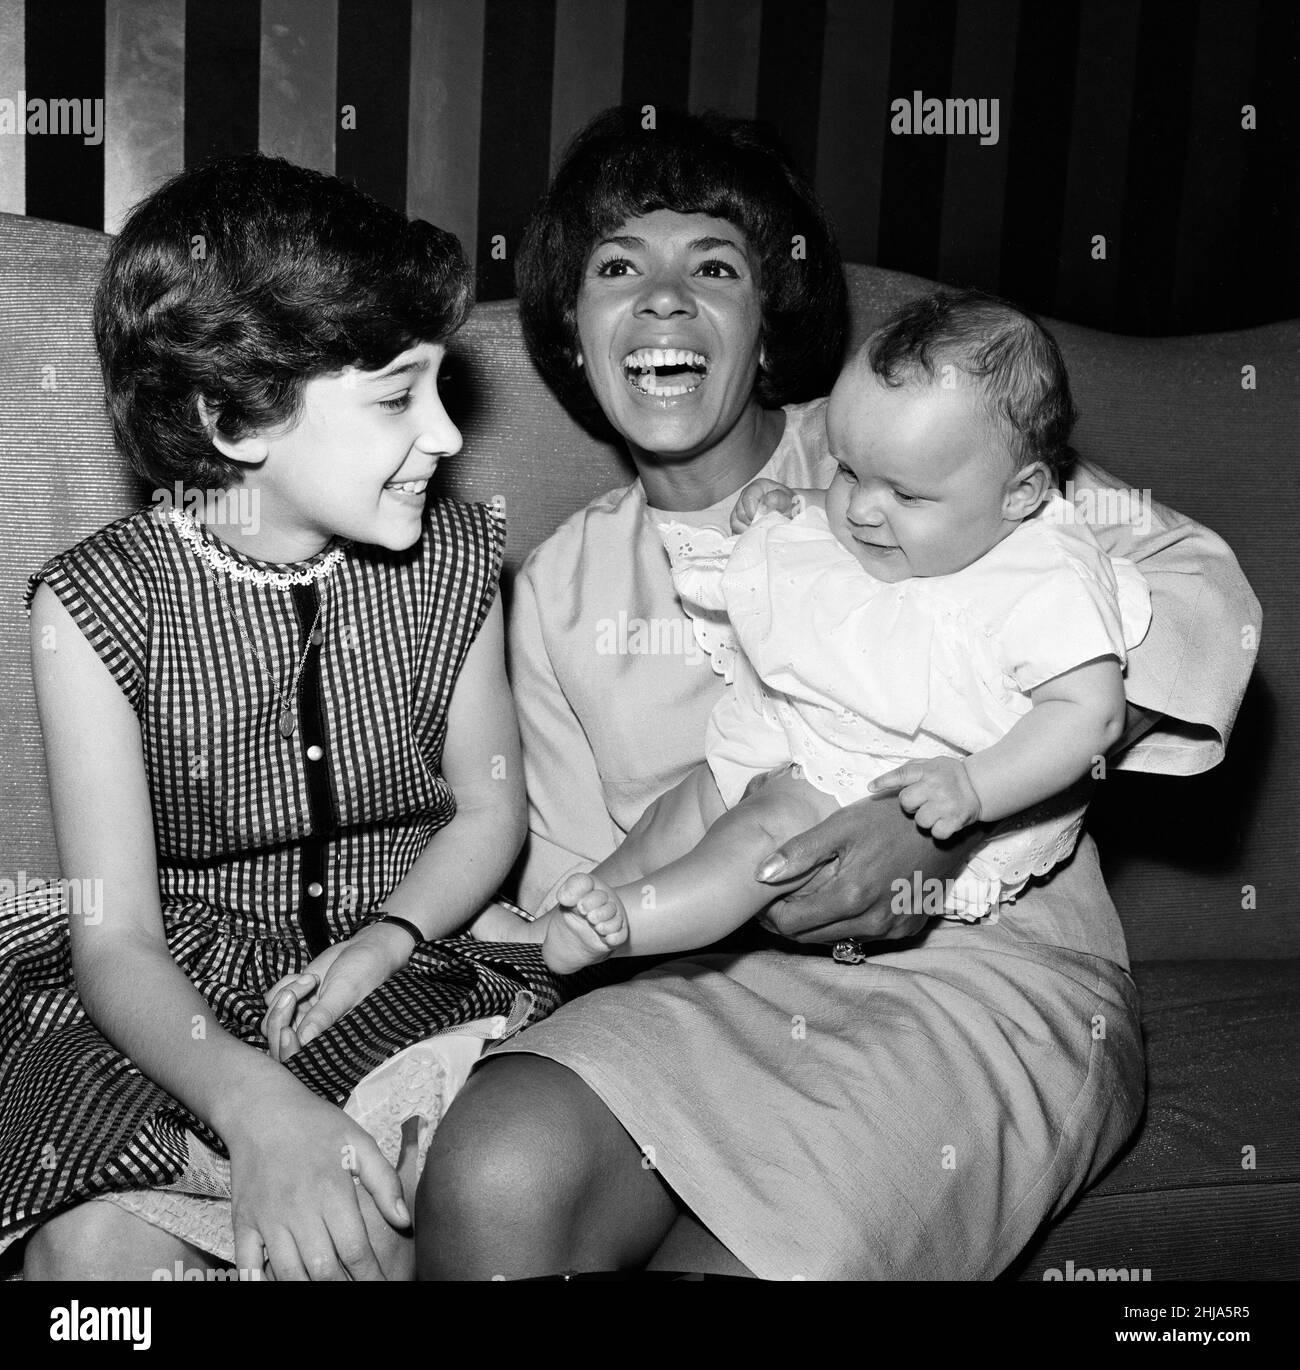 Shirley Bassey opens a new season tomorrow at the Talk of the Town. She is the first artist to be invited back to the West End night spot three times. Shirley took her two children to rehearsals, Samantha, 7 months, daughter of her marriage to Kenneth Hume, and 9-year-old Sharon. Sharon was born when Shirley was a struggling singer in Cardiff. For years she knew her mother as only Auntie Shirley, now they all live together as one family. 30th May 1964. Stock Photo